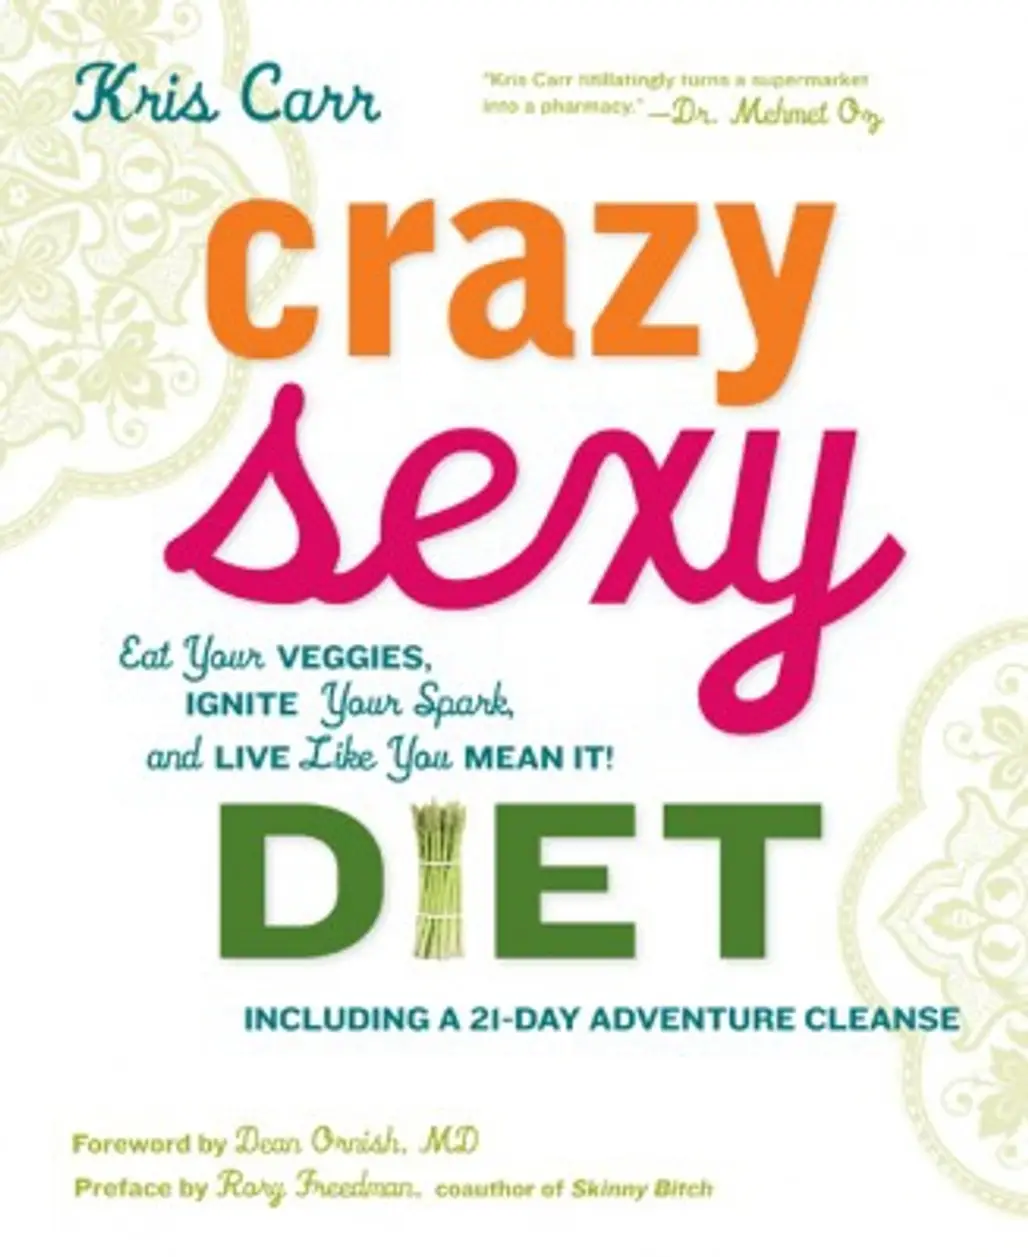 Crazy, Sexy Diet by Kris Carr